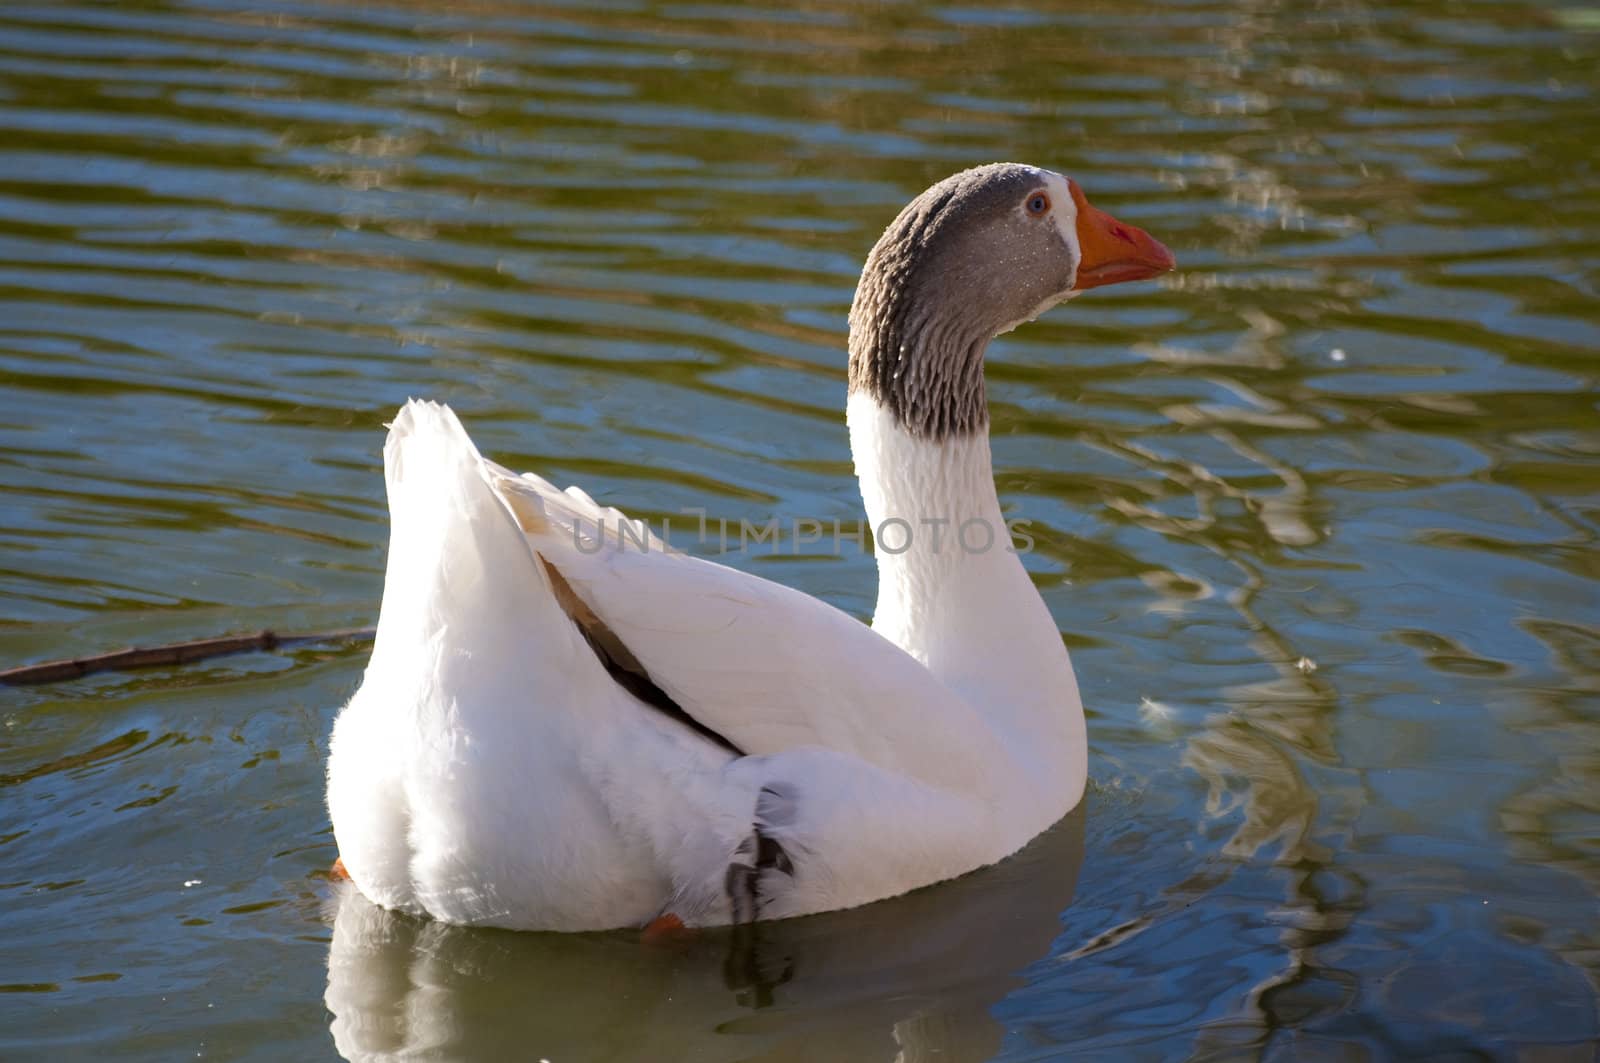 Image of a duck in river. Wild life from spain